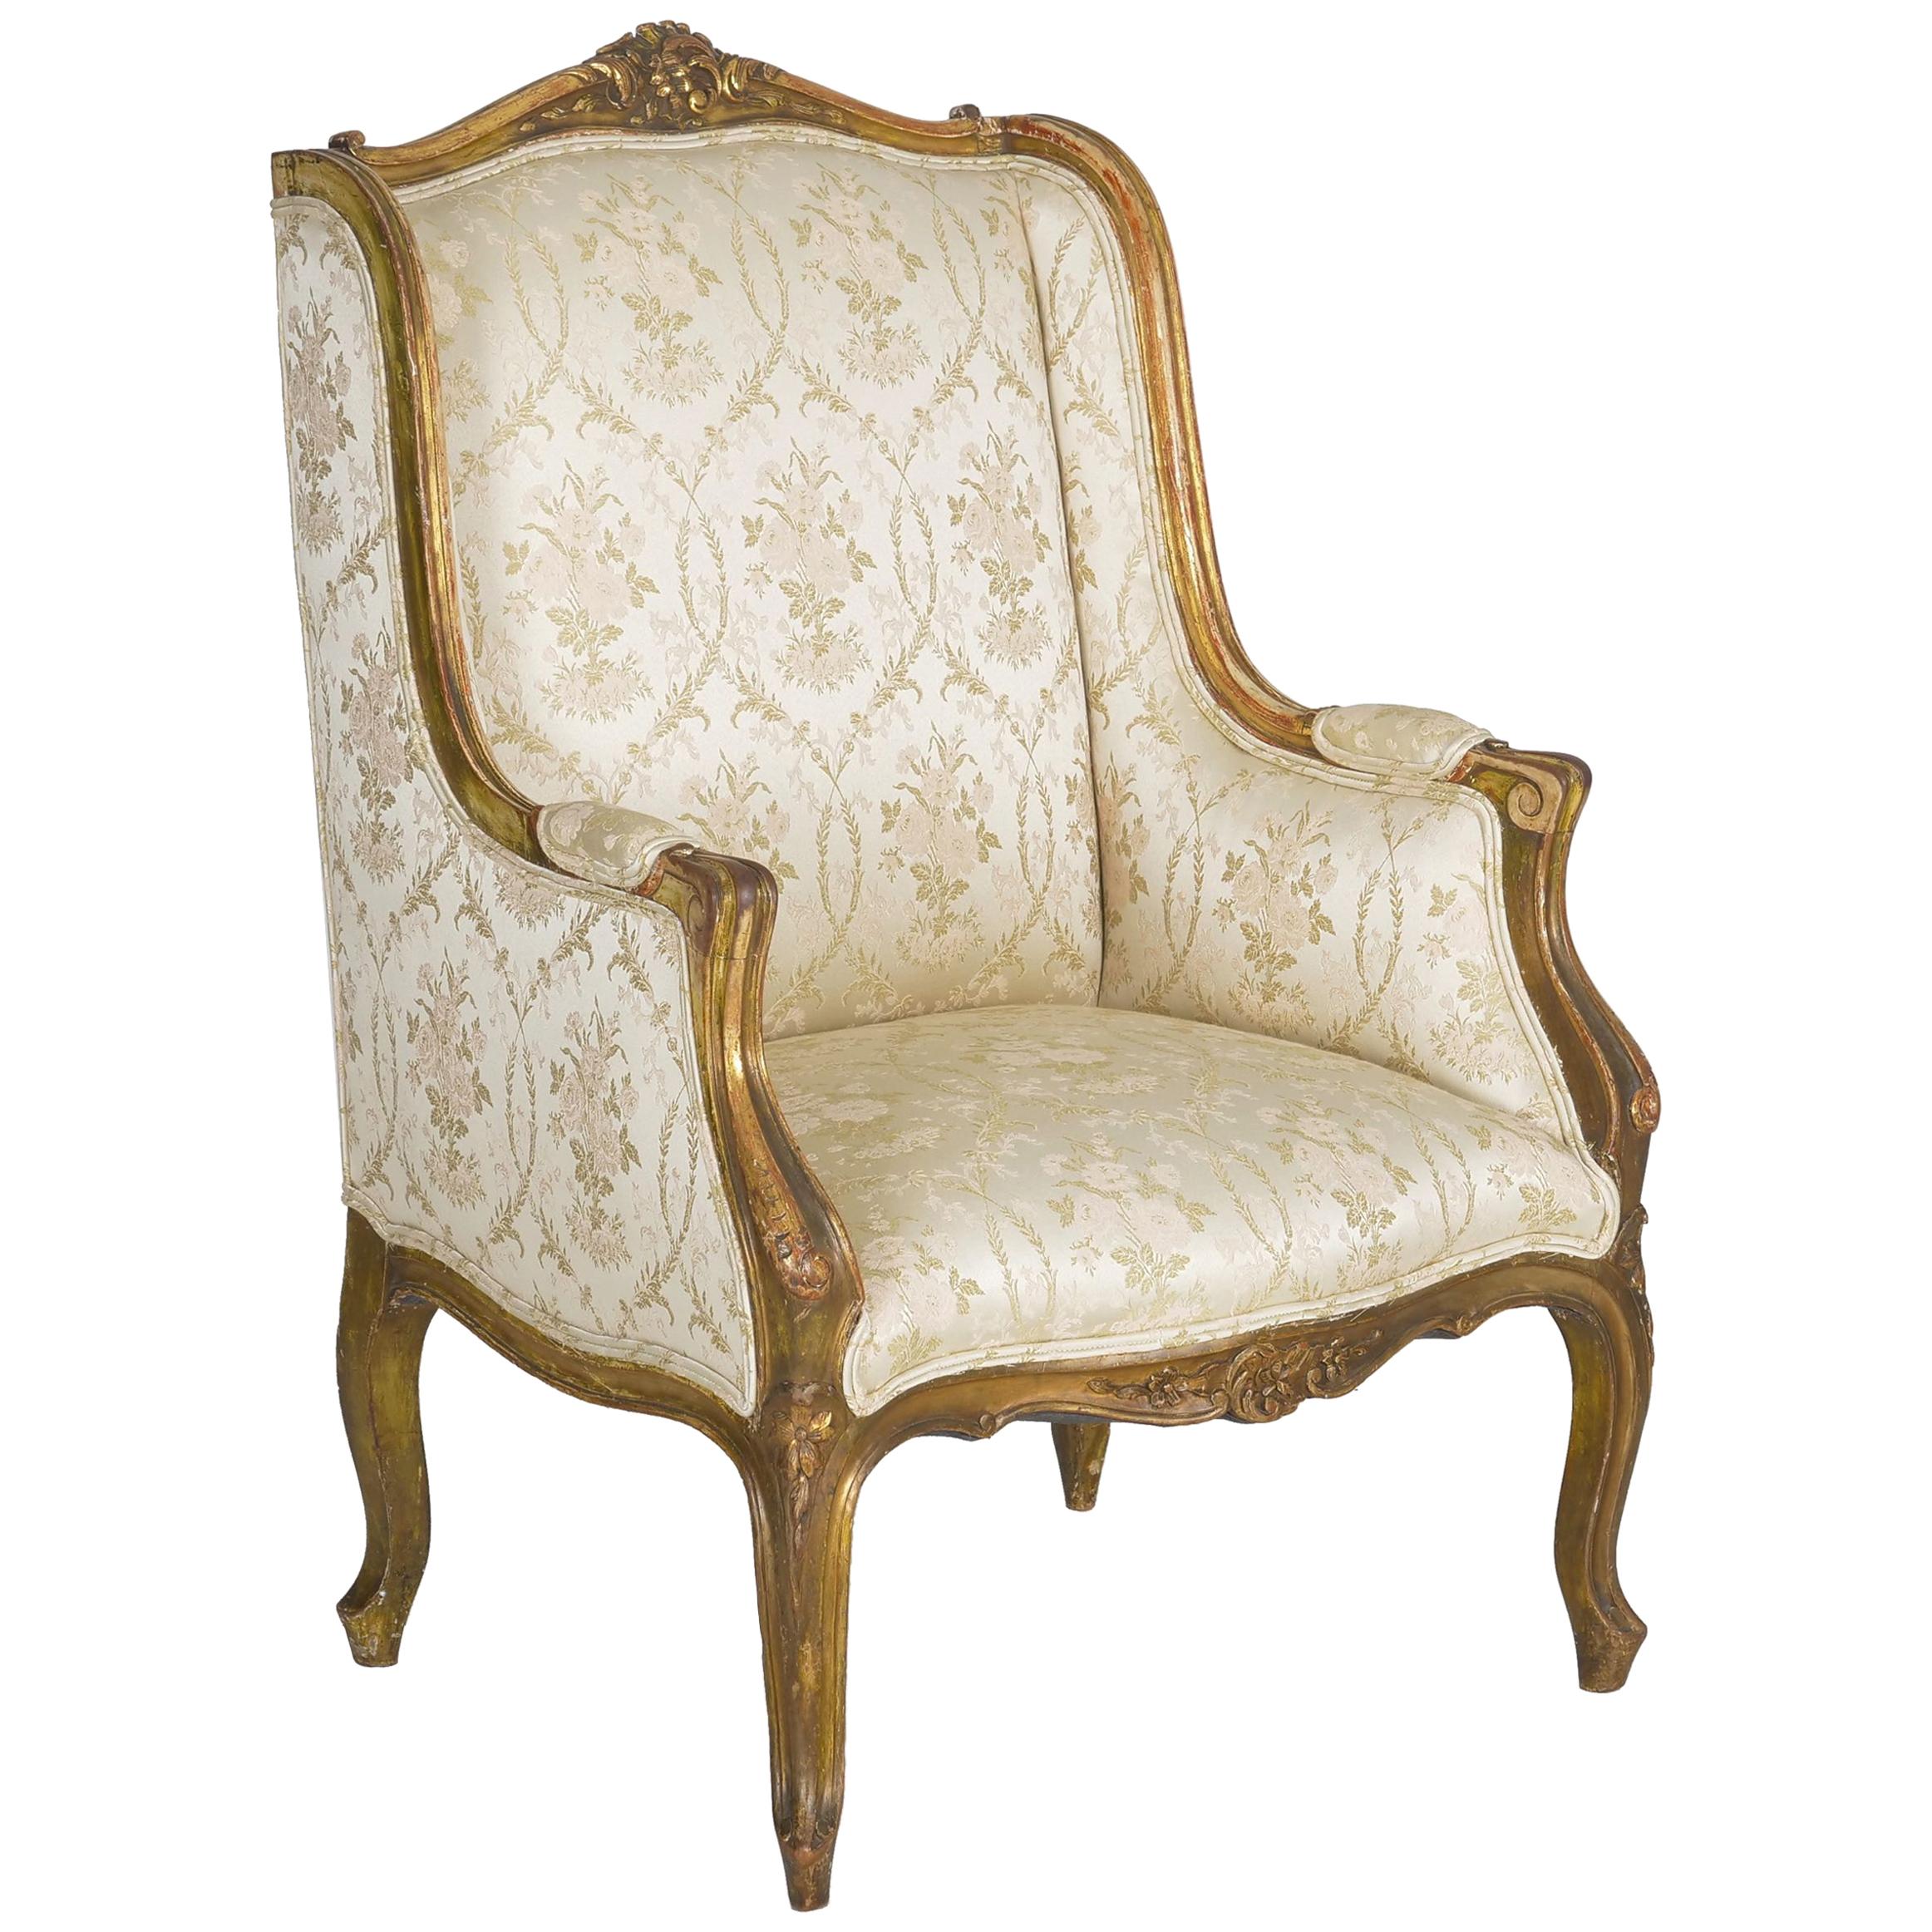 French Louis XV Style Carved Painted Antique Armchair, 19th Century